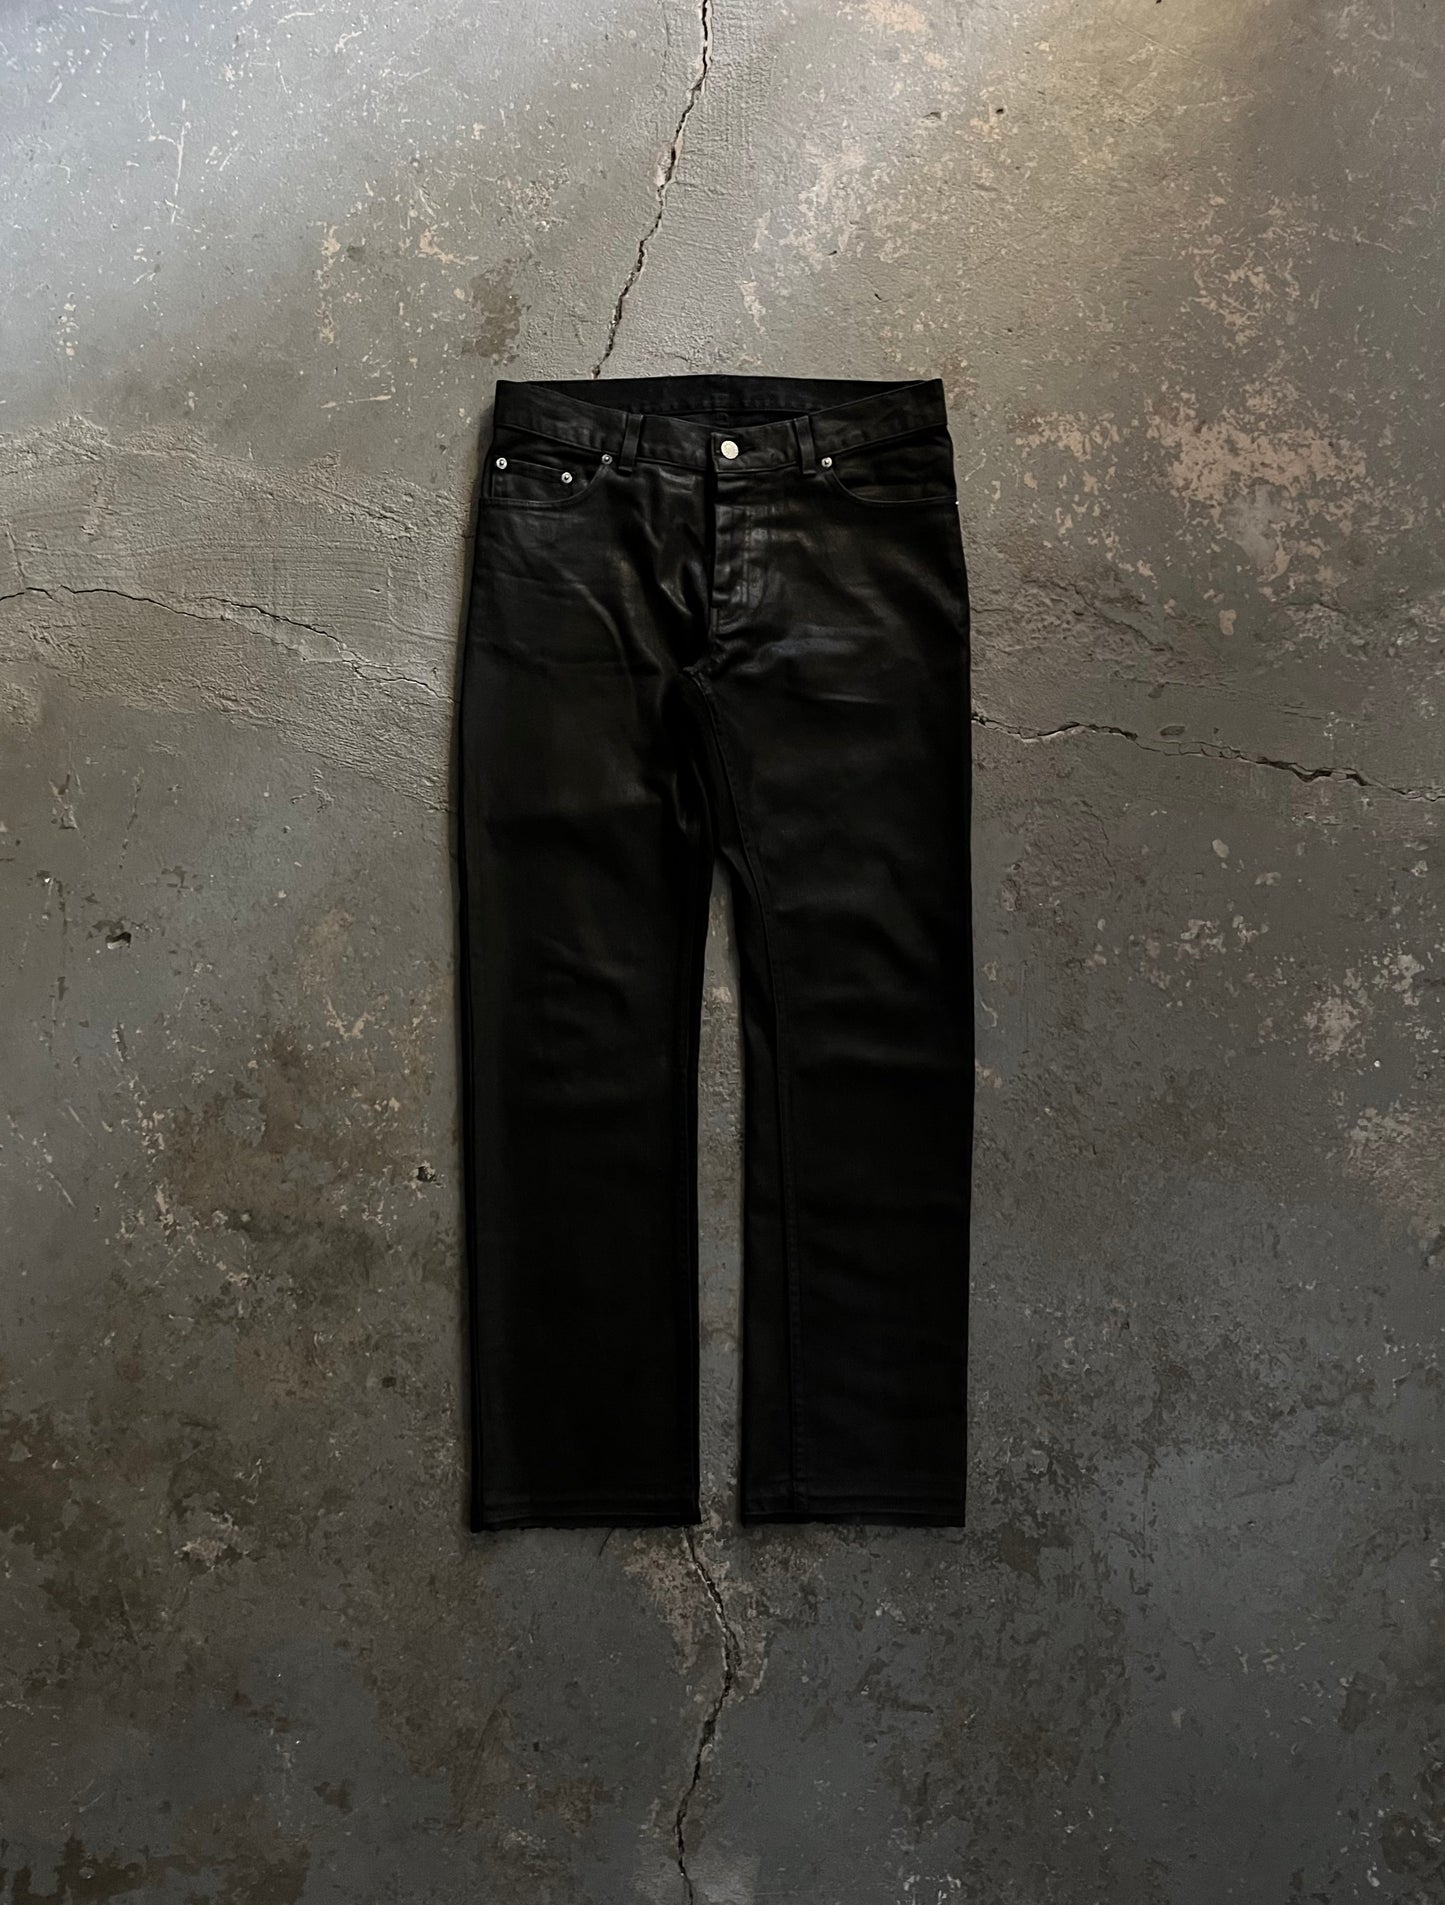 Helmut Lang SS98 Wax Coated Jeans